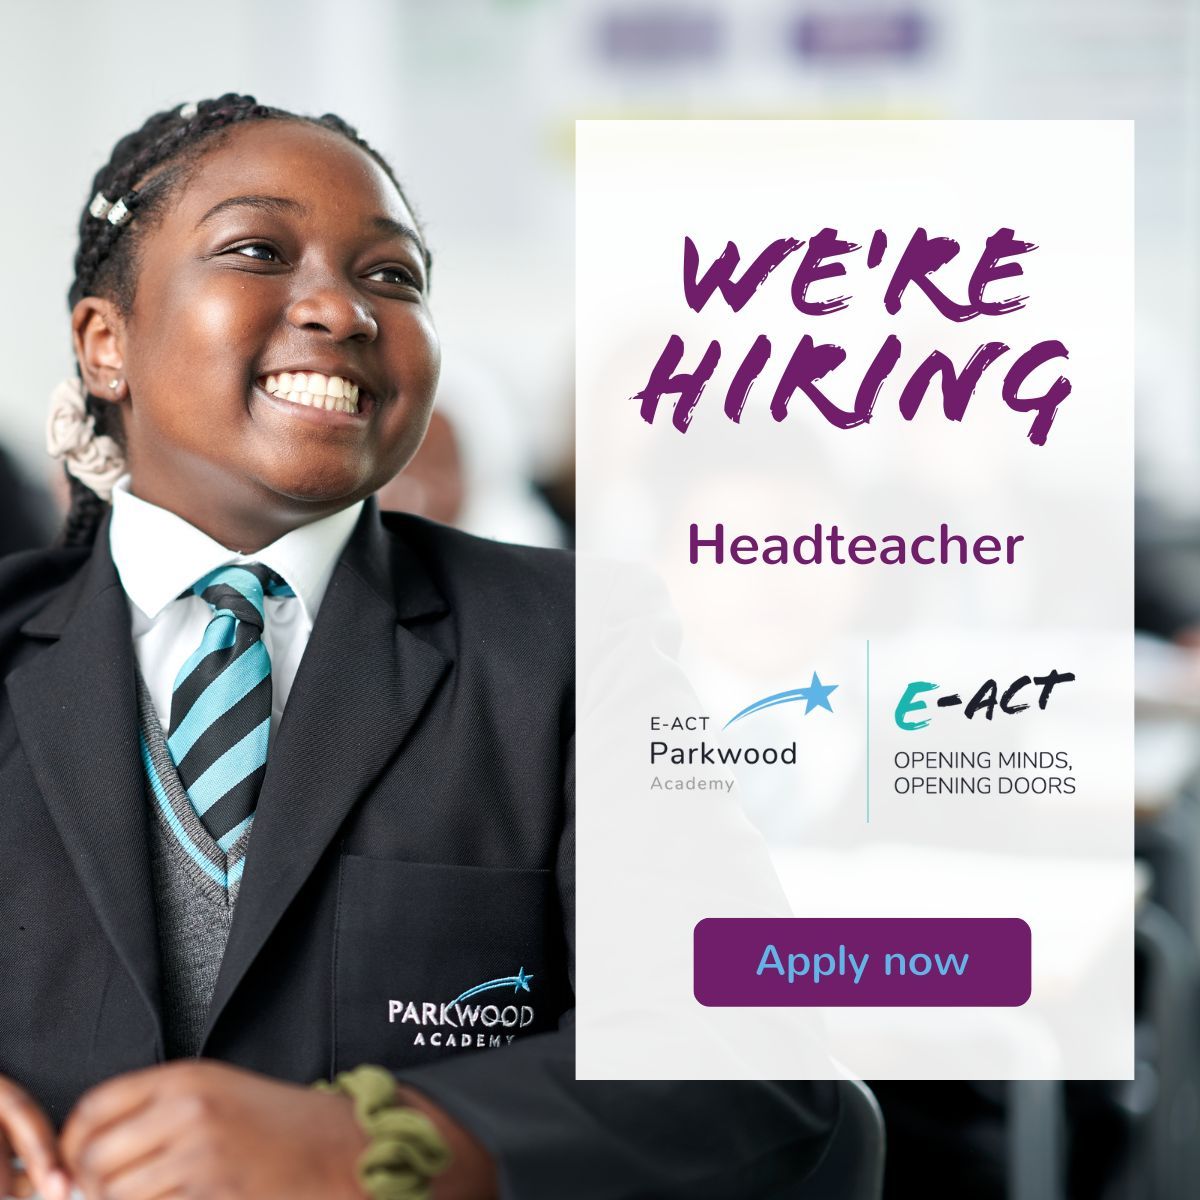 Are you passionate about shaping the future of education? This opportunity is for you! 💫 E-ACT Parkwood Academy are looking for of an outstanding #Headteacher to become part of the team! Apply now ➡️buff.ly/3Tum6MZ #WeAreEACT #headteacherjob #educationjob